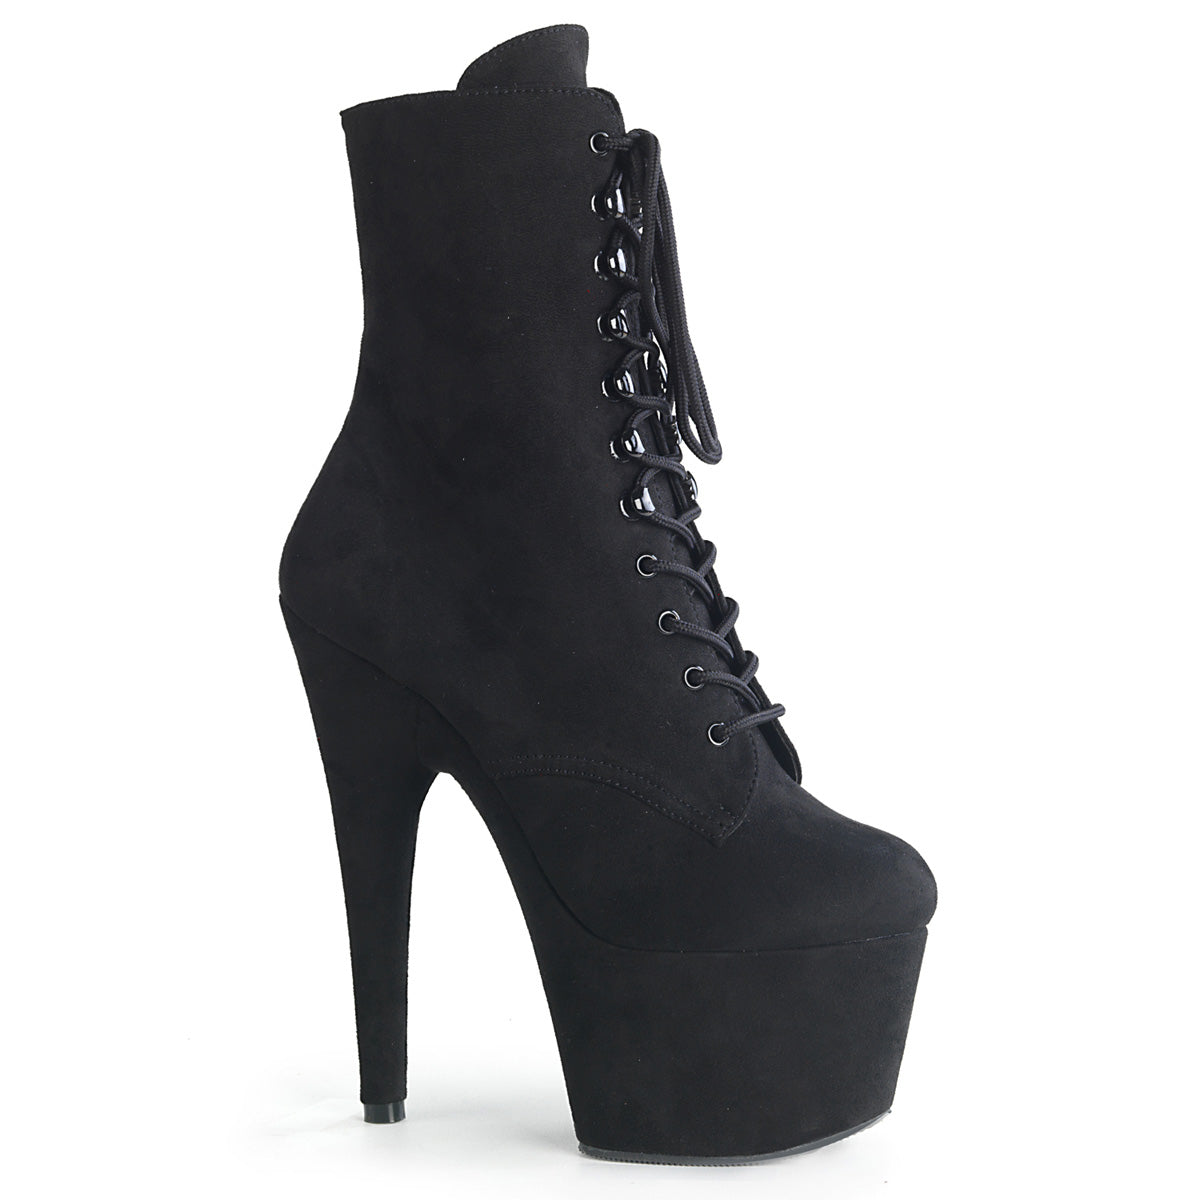 ADORE-1020FS Black Ankle Boots